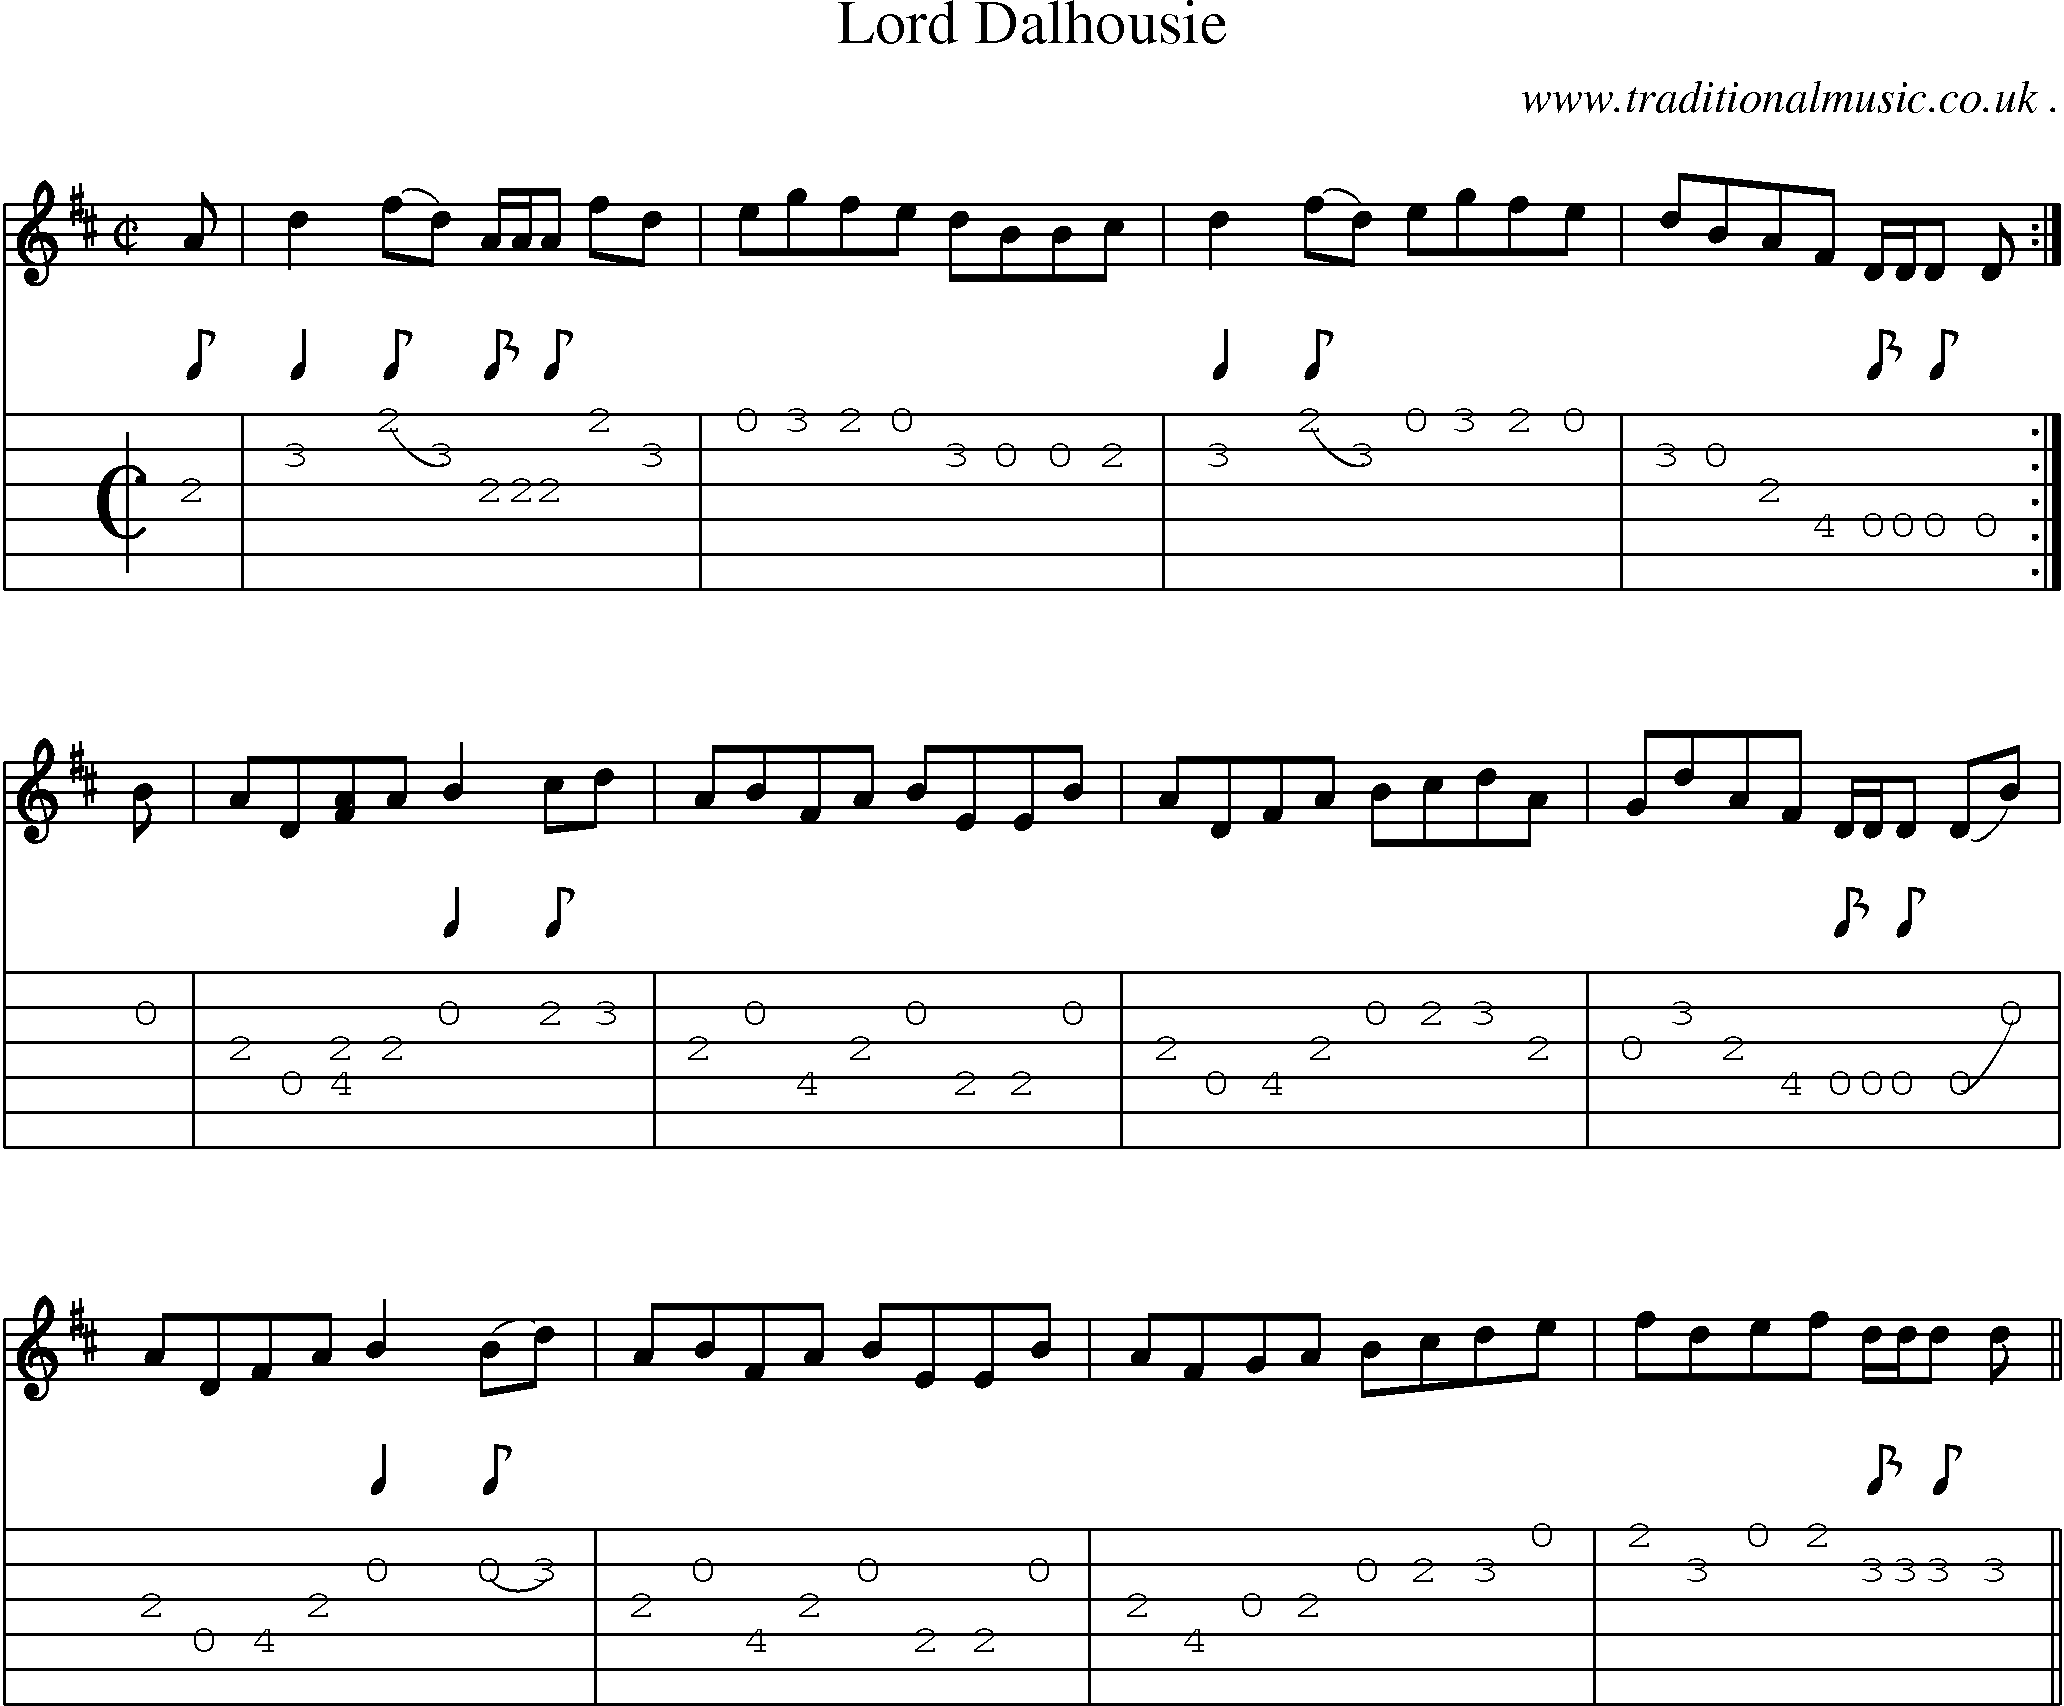 Sheet-music  score, Chords and Guitar Tabs for Lord Dalhousie